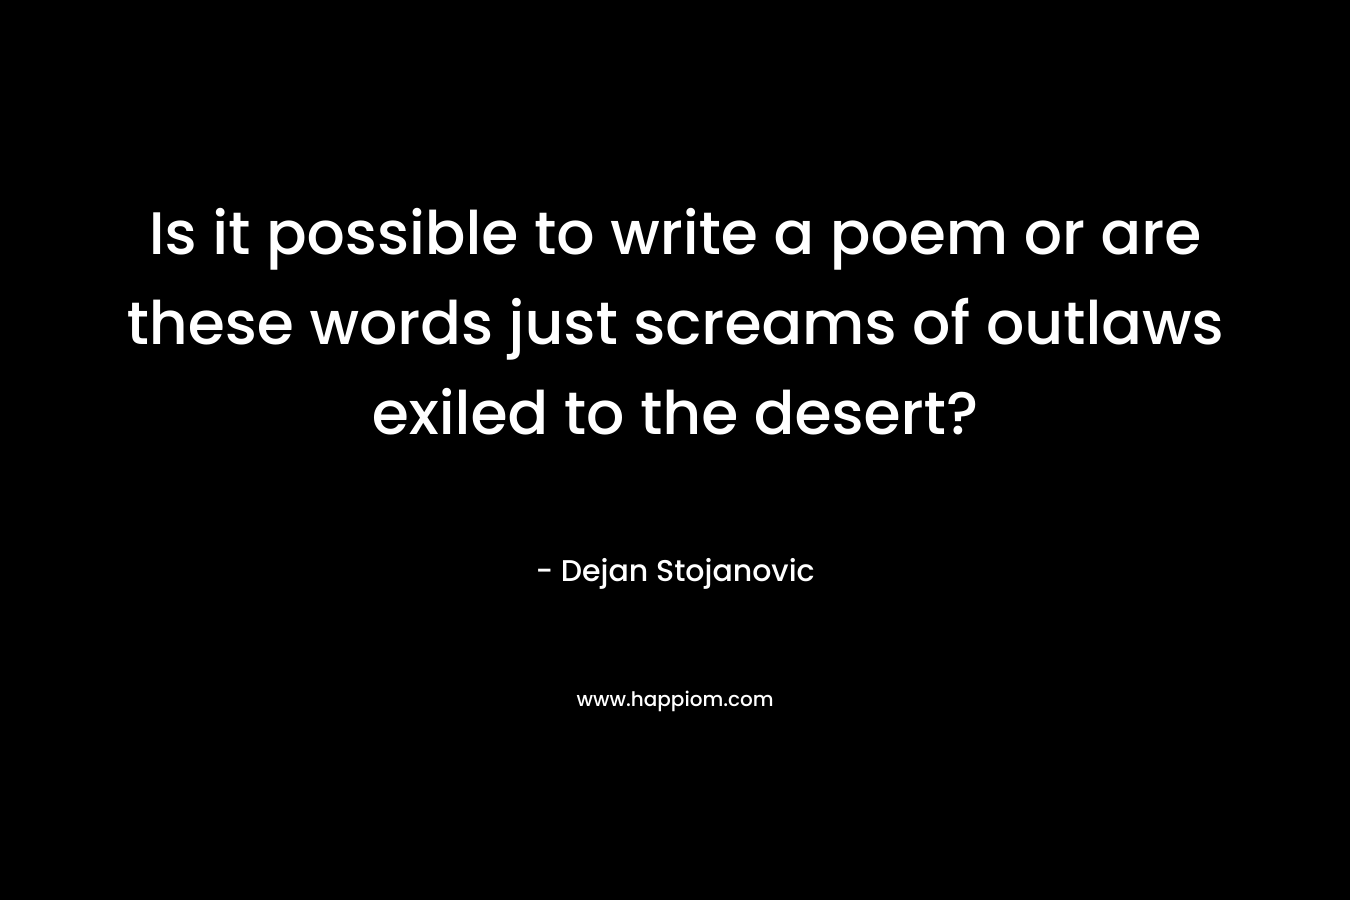 Is it possible to write a poem or are these words just screams of outlaws exiled to the desert? – Dejan Stojanovic